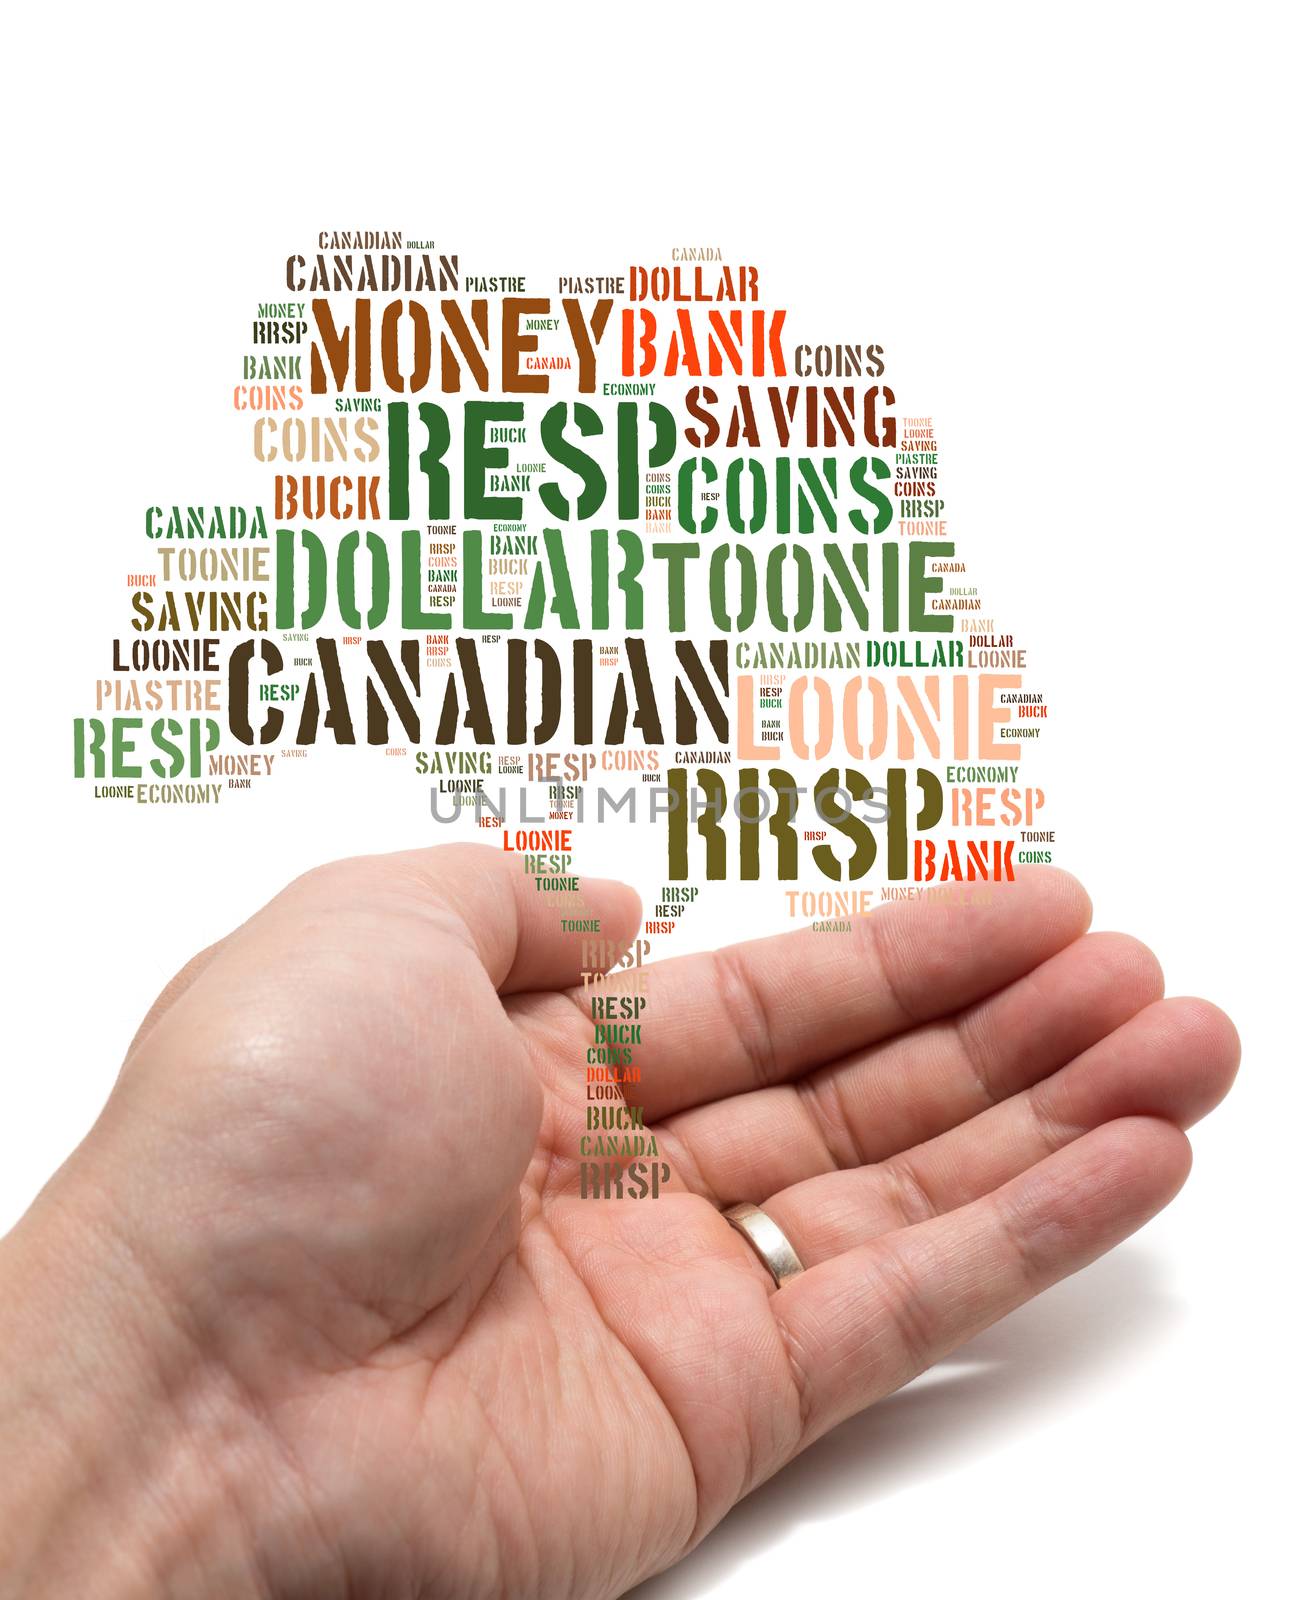 Canadian savings concept by daoleduc